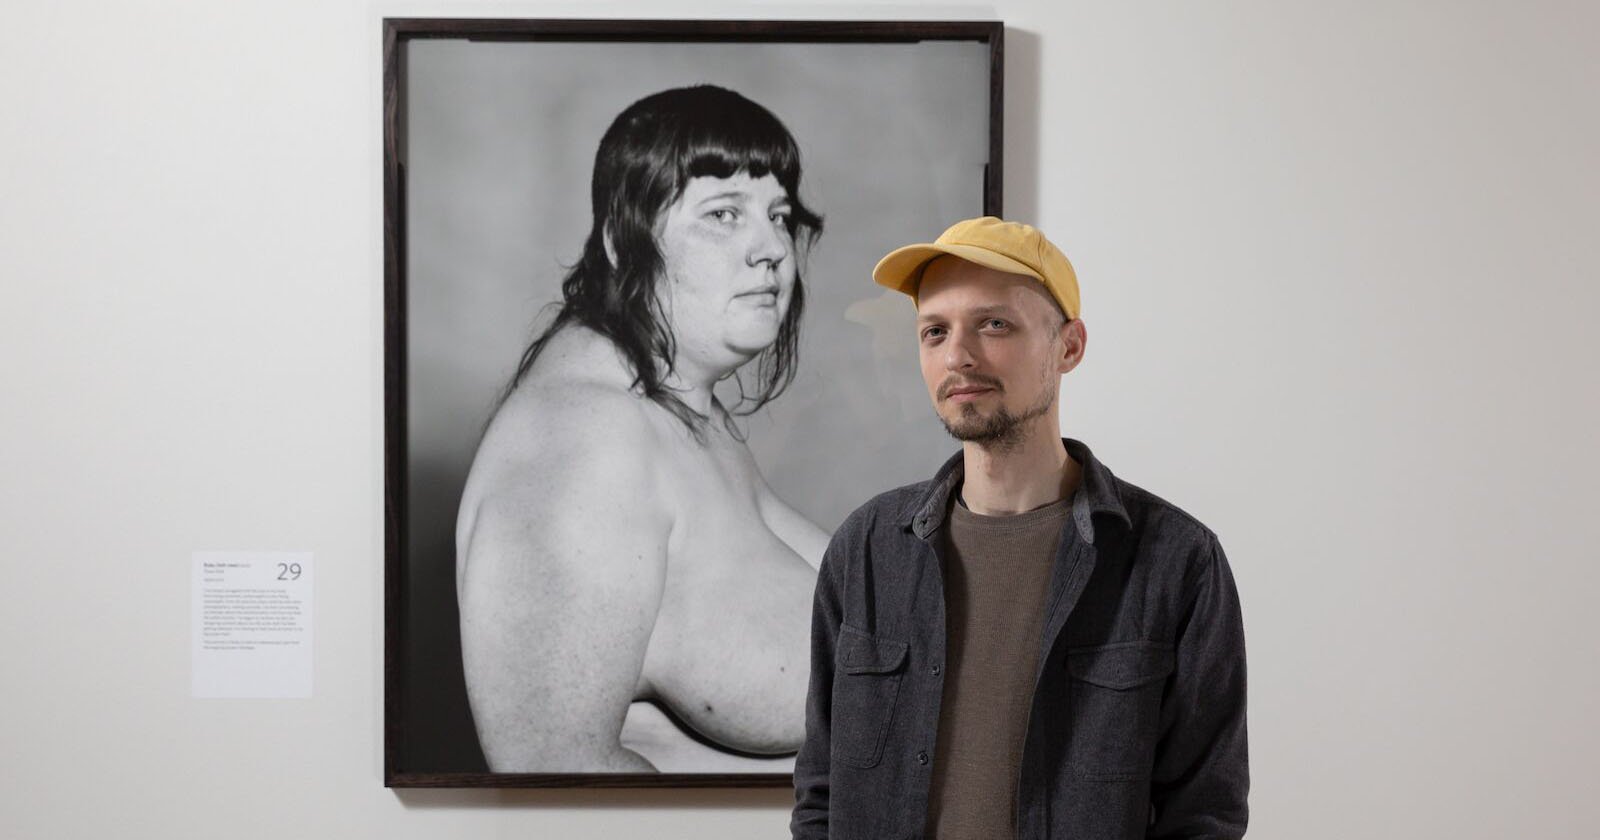 Top National Photographic Portrait Prize Winner Takes Home $30,000